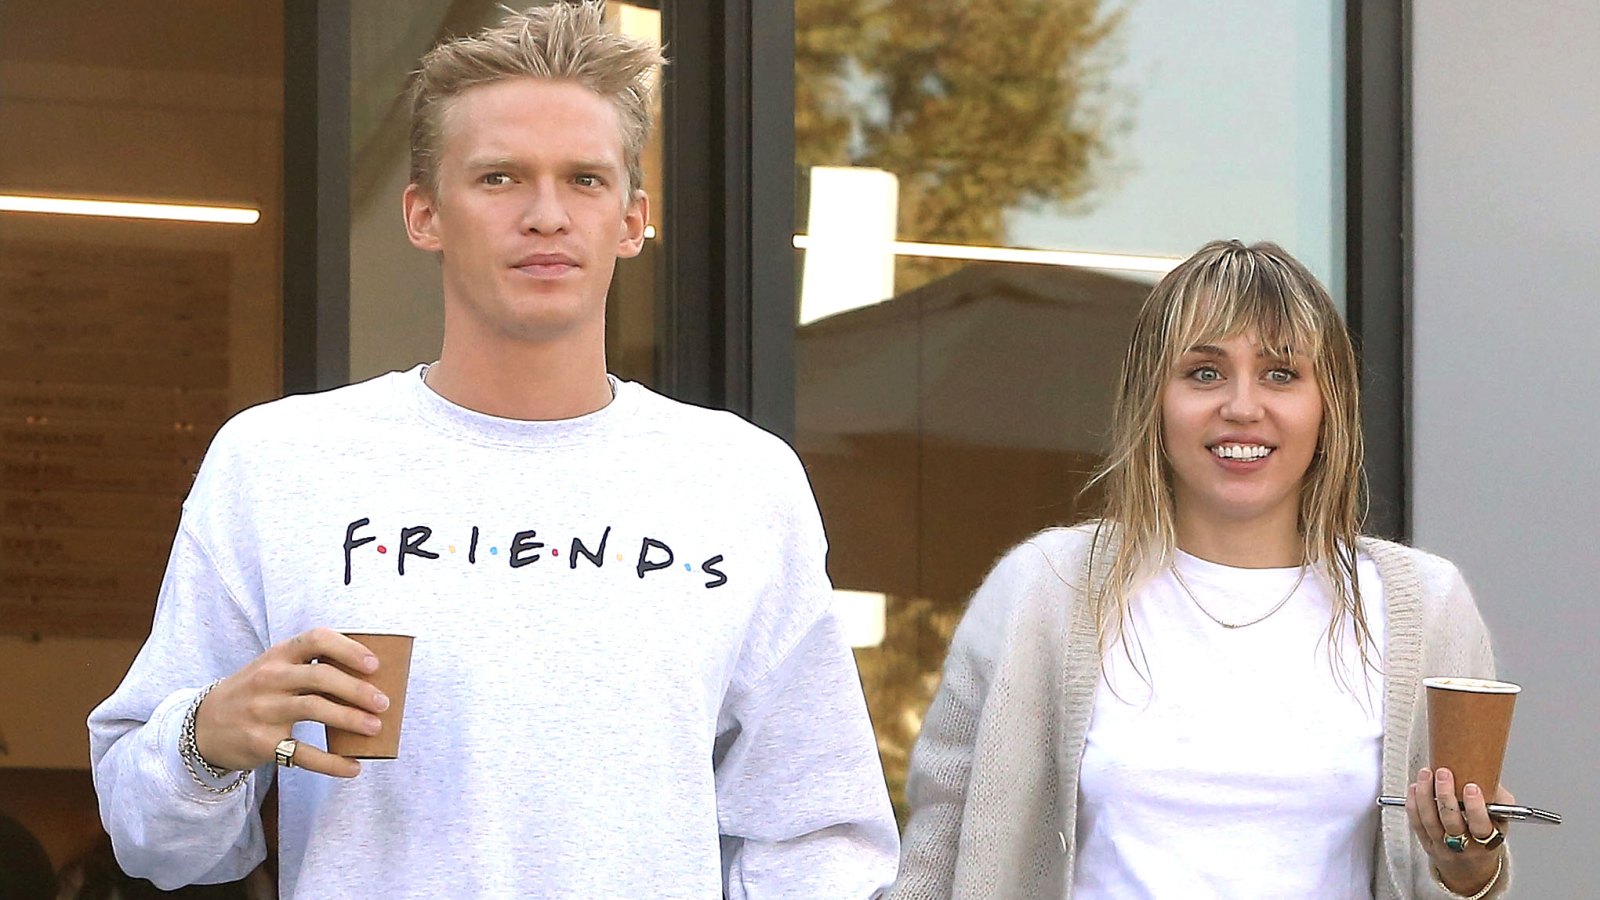 Miley Cyrus Sings 'Old Town Road' With Cody Simpson, Her Family After Vocal Cord Surgery